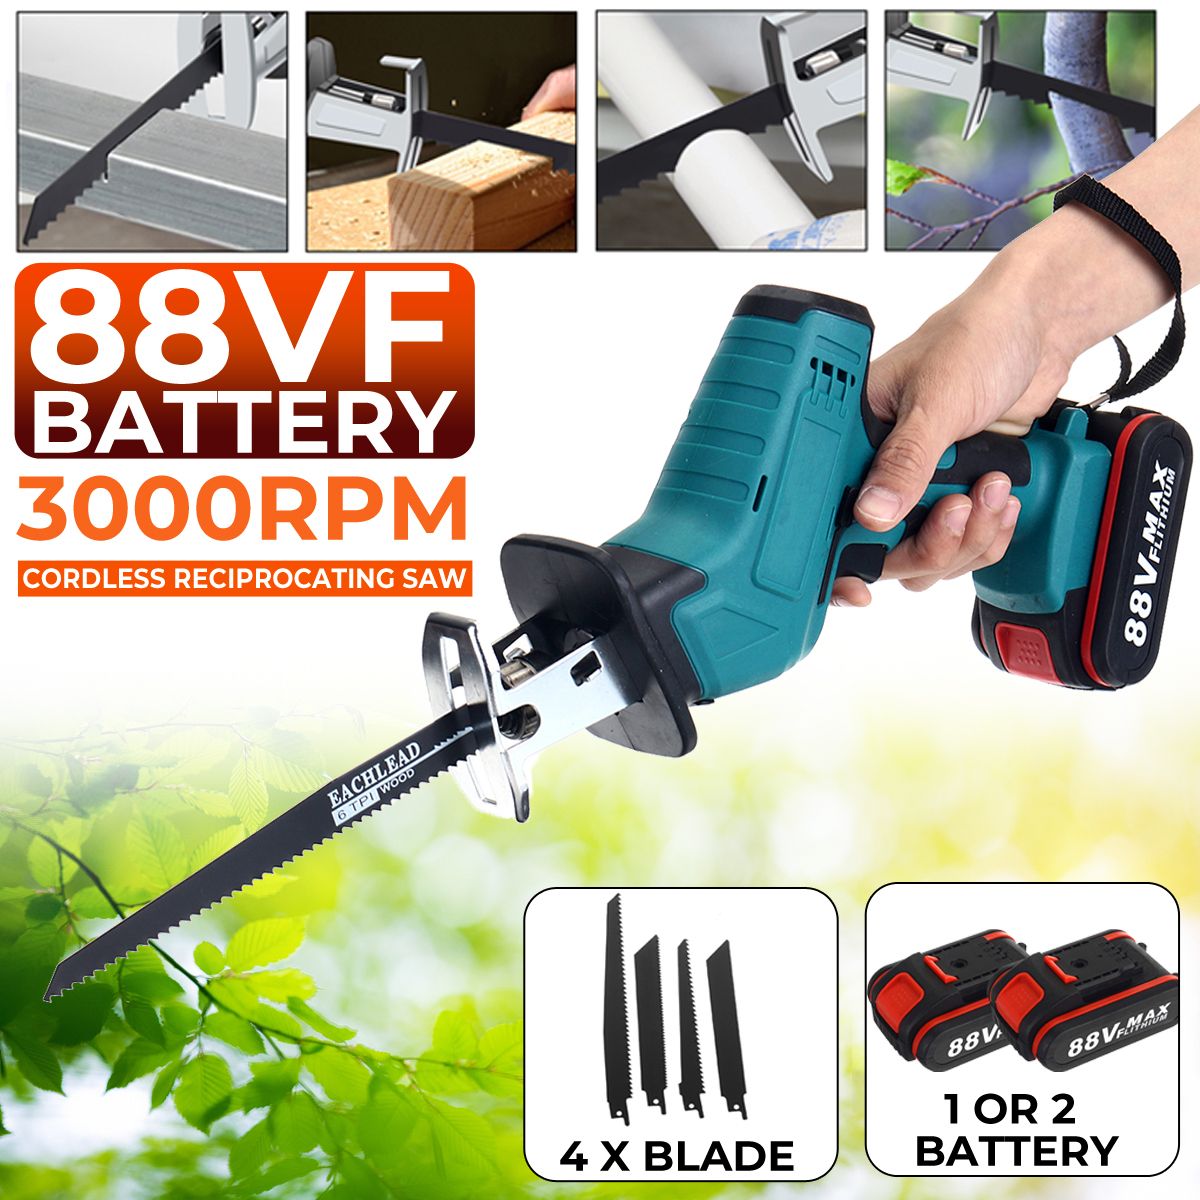 88VF-Cordless-Electric-Reciprocating-Saw-Garden-Wood-Cutting-Pruning-Saw-1761115